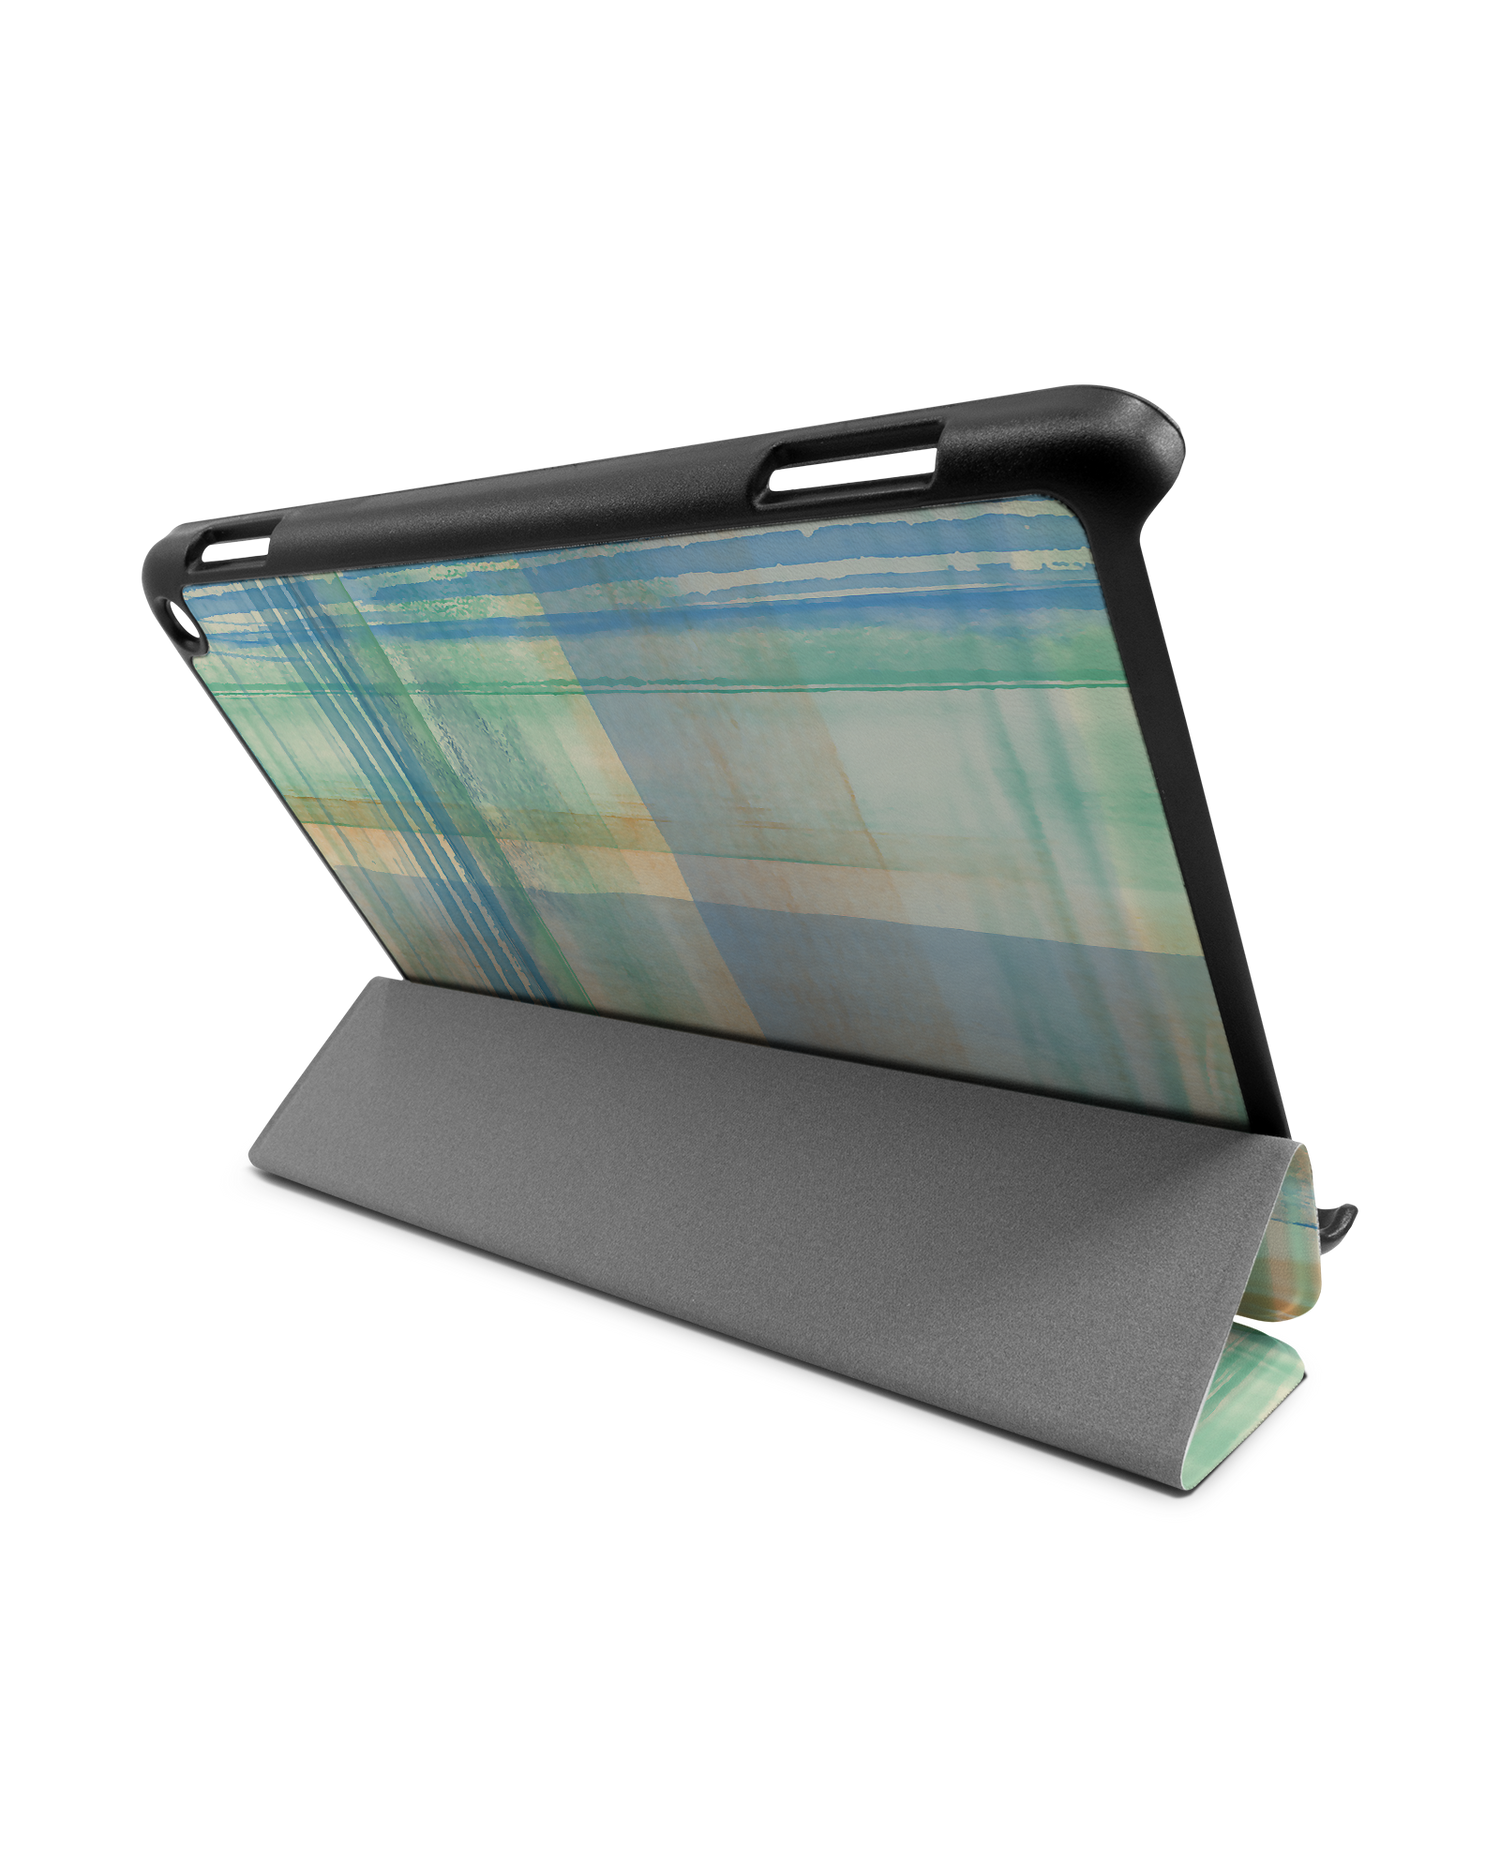 Washed Out Plaid Tablet Smart Case for Amazon Fire HD 8 (2022), Amazon Fire HD 8 Plus (2022), Amazon Fire HD 8 (2020), Amazon Fire HD 8 Plus (2020): Used as Stand